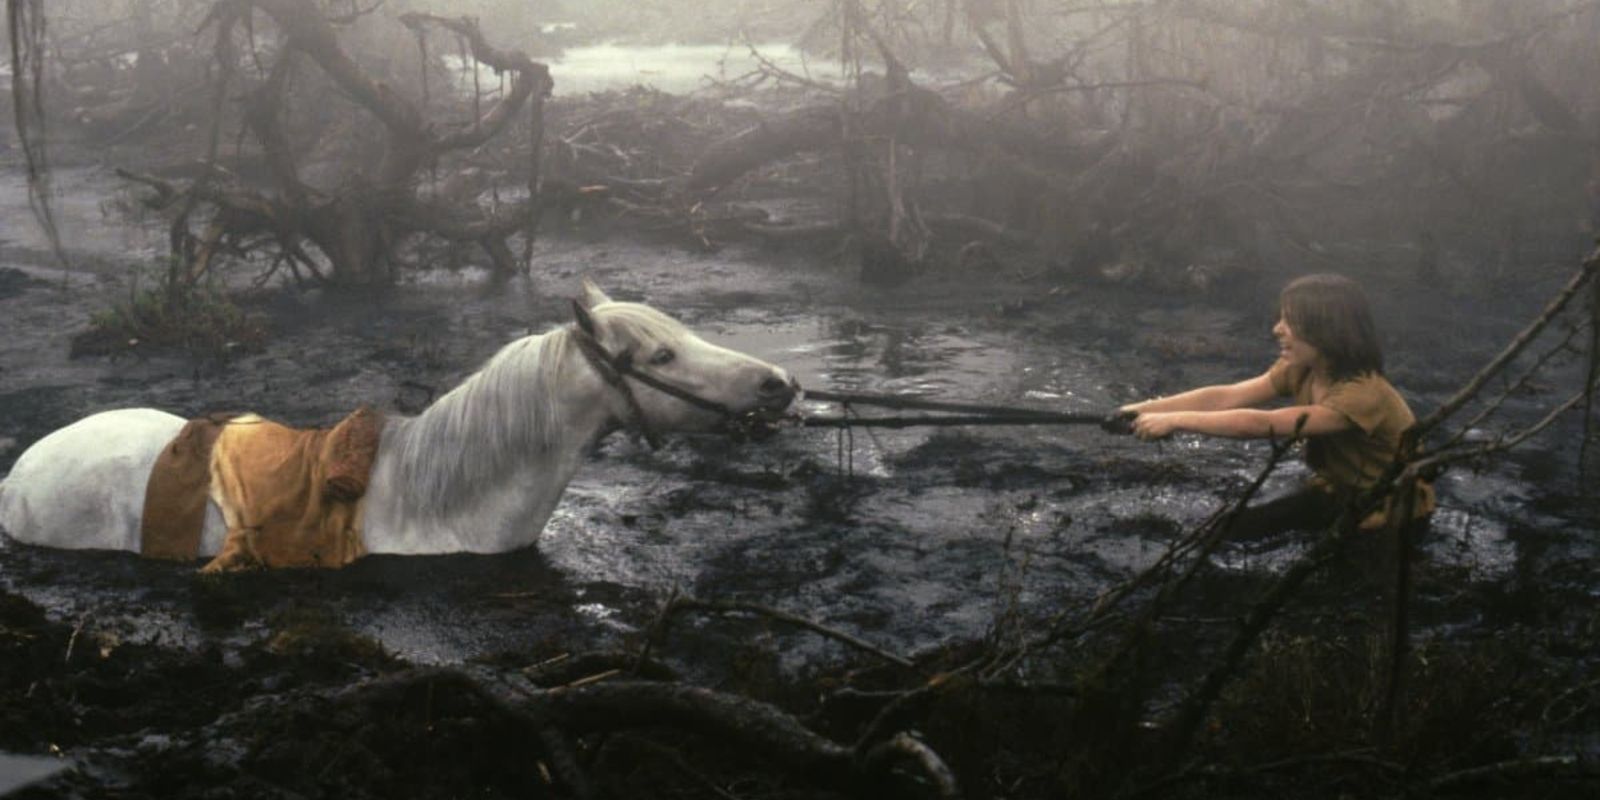 The NeverEnding Story Remake Can’t Include THAT Scene From The Original (But Should Match It)